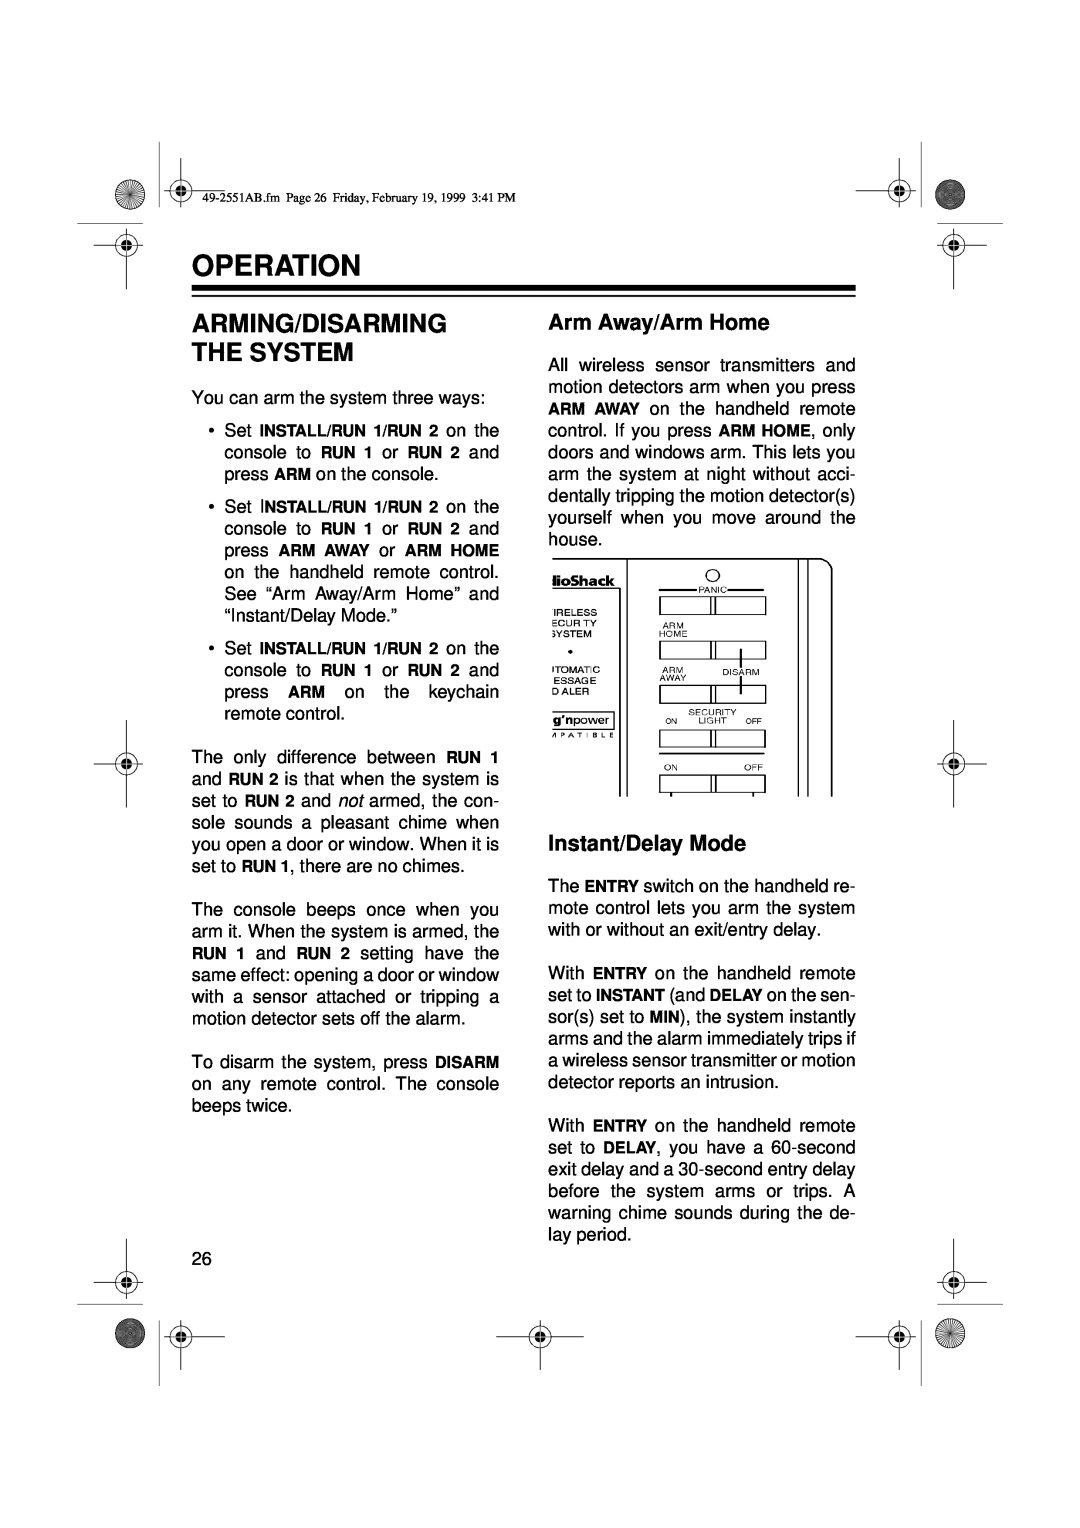 Radio Shack 49-2551A owner manual Operation, Arming/Disarming The System, Arm Away/Arm Home, Instant/Delay Mode 